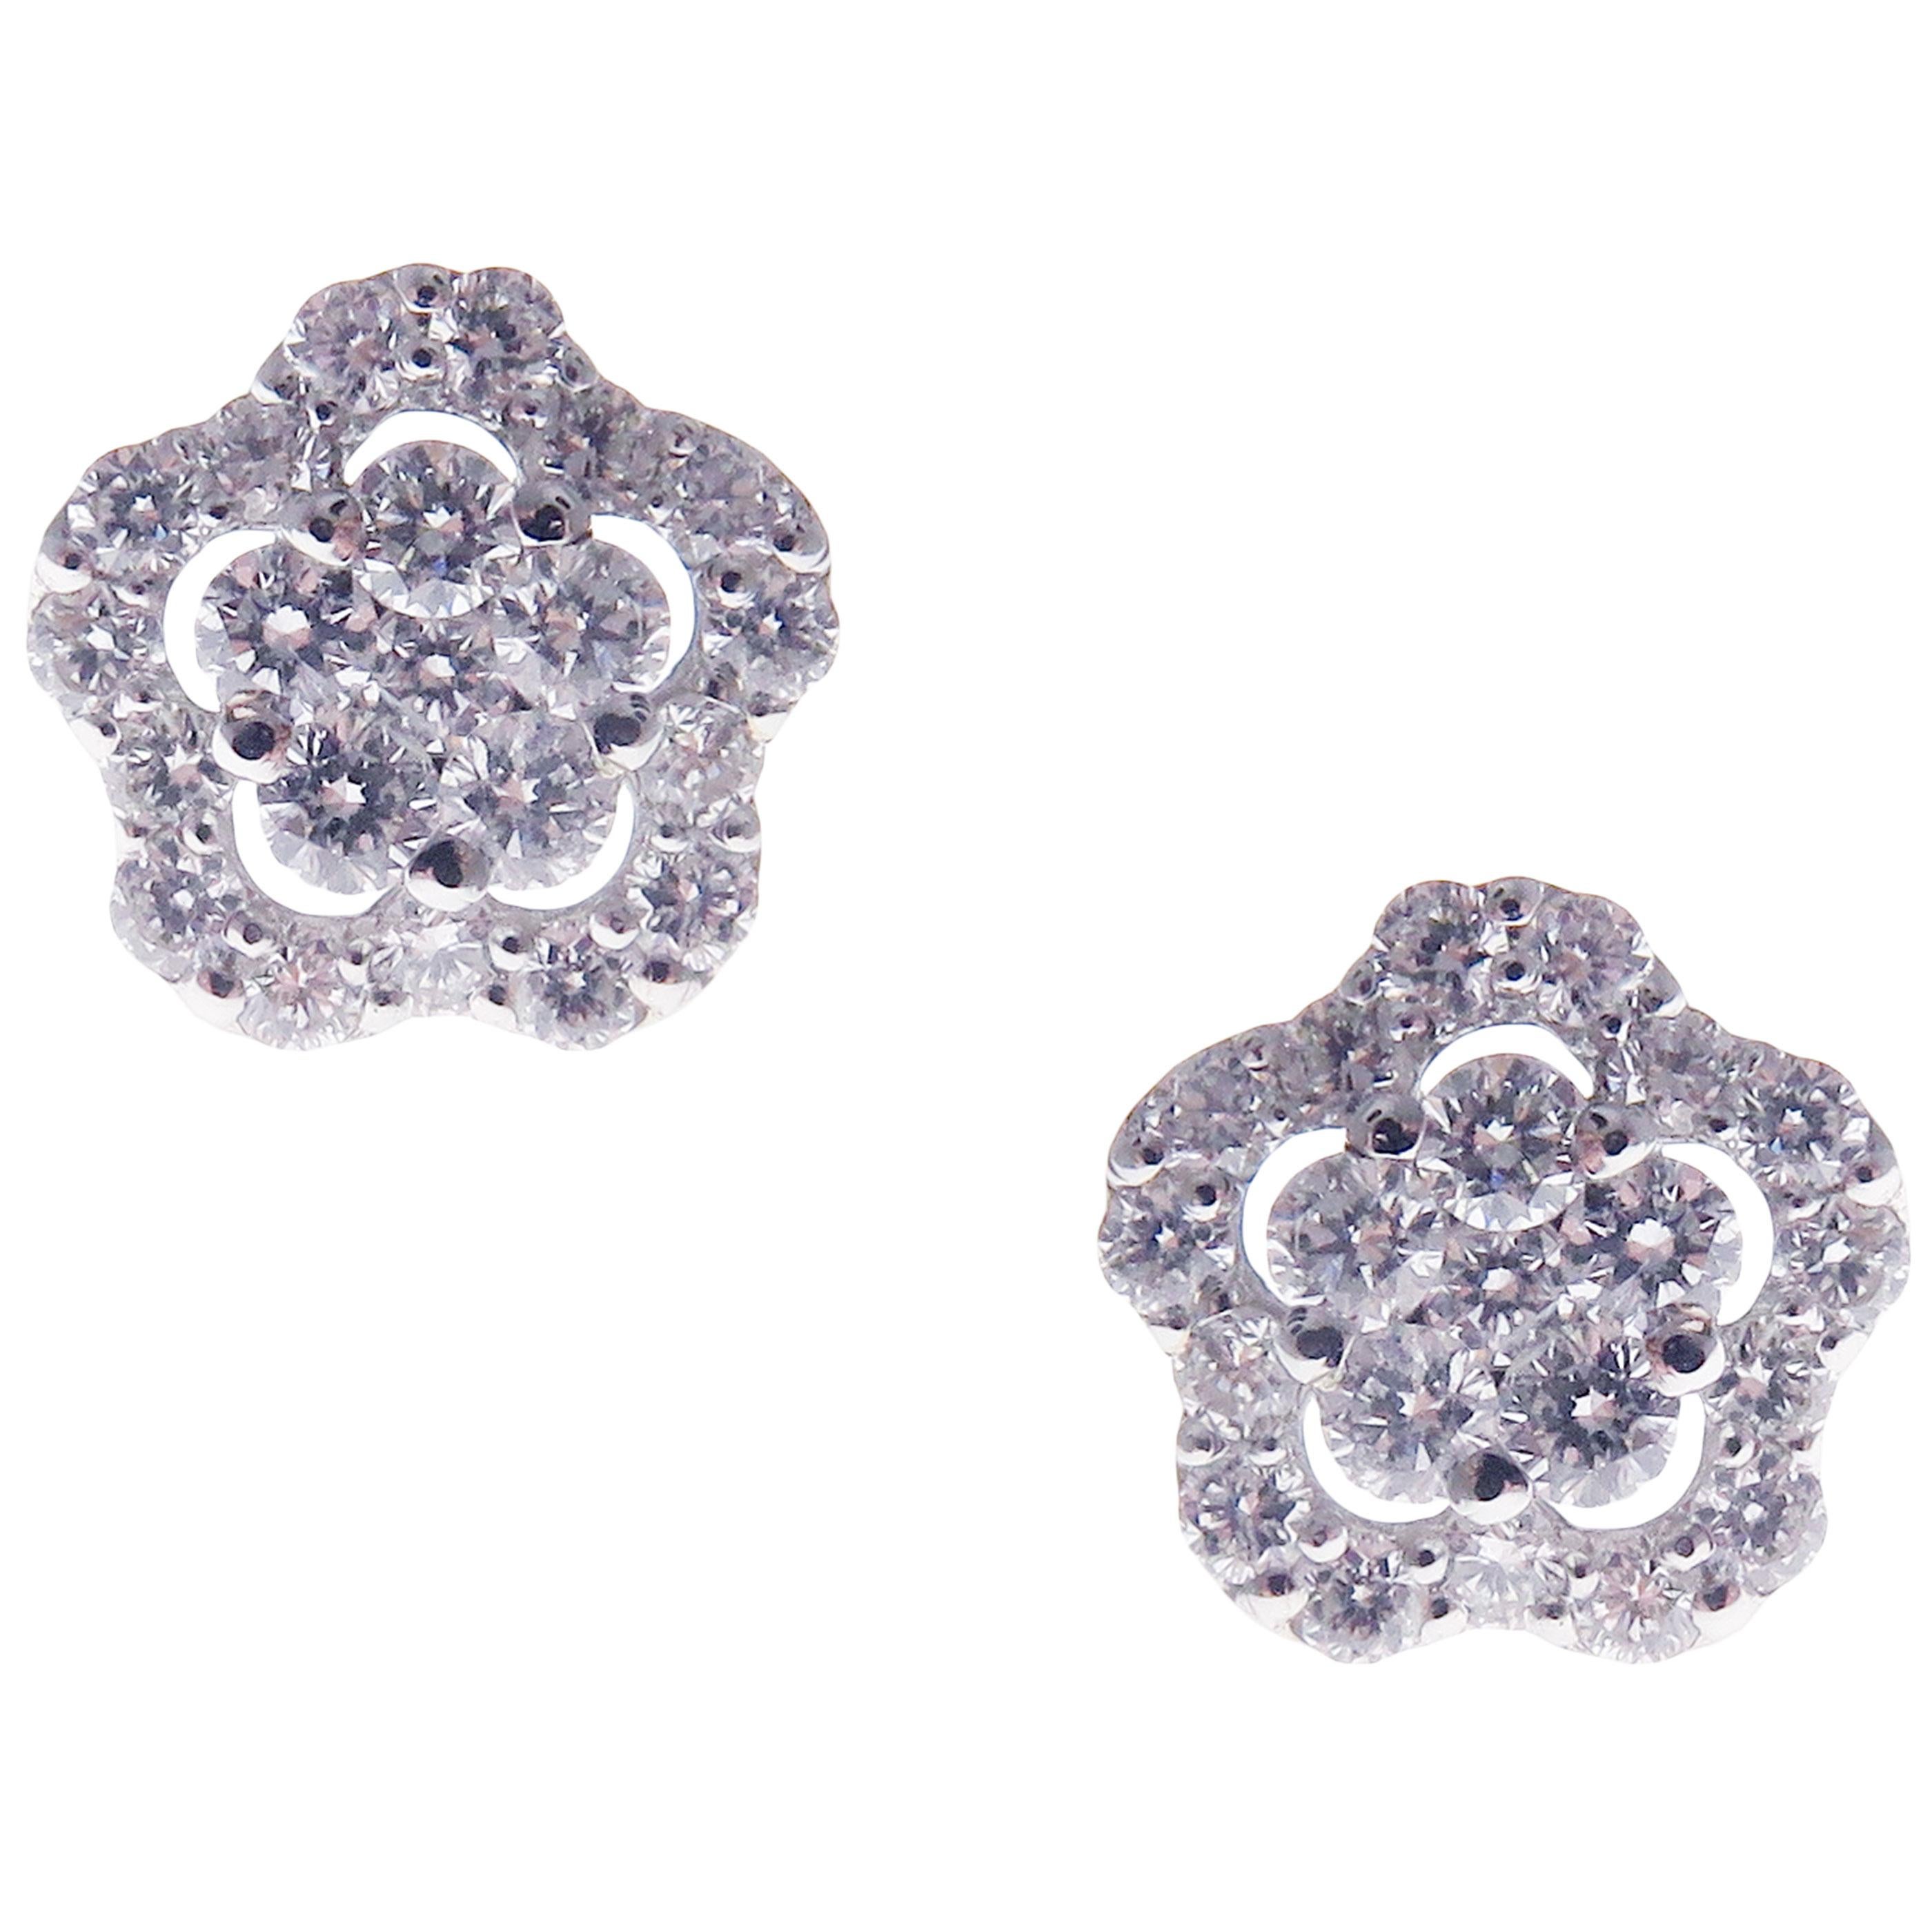 This classic diamond flower stud earring is crafted in 18-karat white gold, featuring 42 round white diamonds totaling of 0.48 carats.
Approximate total weight 1.65 grams.
These earrings come with push back post backings.
SI-G Quality natural white